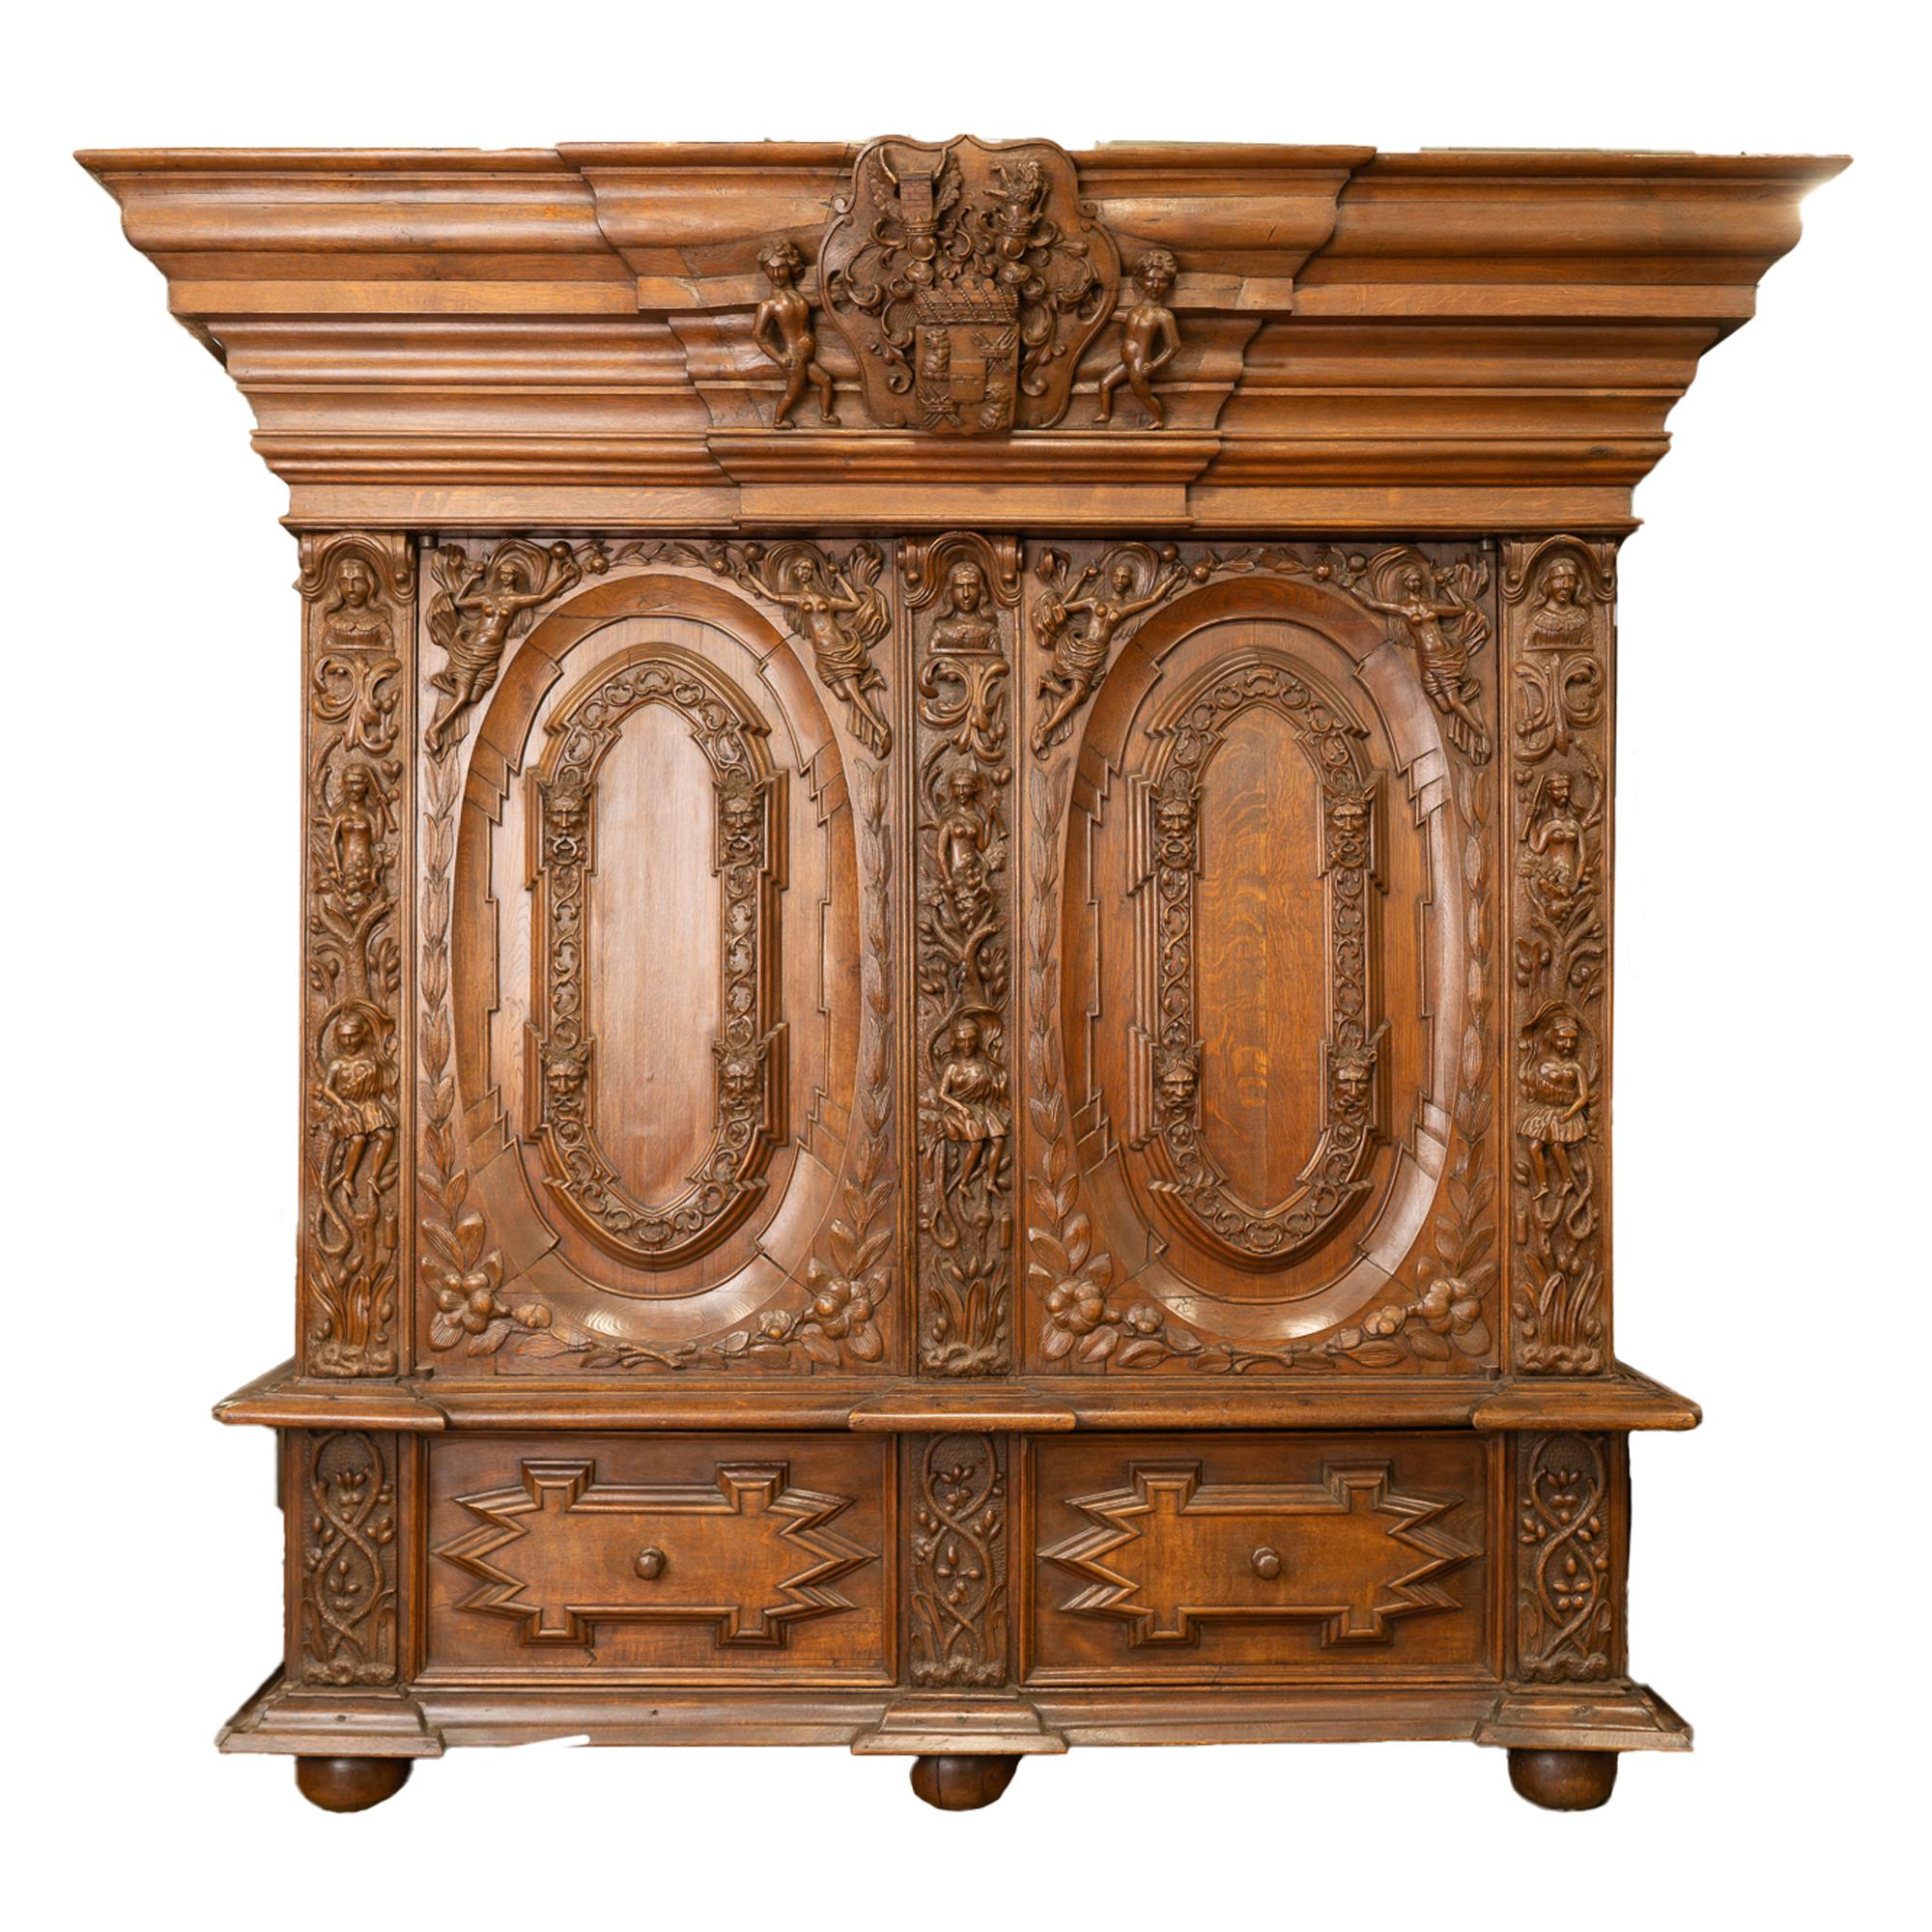 Grandly standing over 8' tall, this stately hand-carved oak armoire makes a regal statement as it originally stood in the castle of the Swedish noble family of Carl Gustaf Wrangel.
Please enlarge photos to appreciate the fine craftsmanship in the